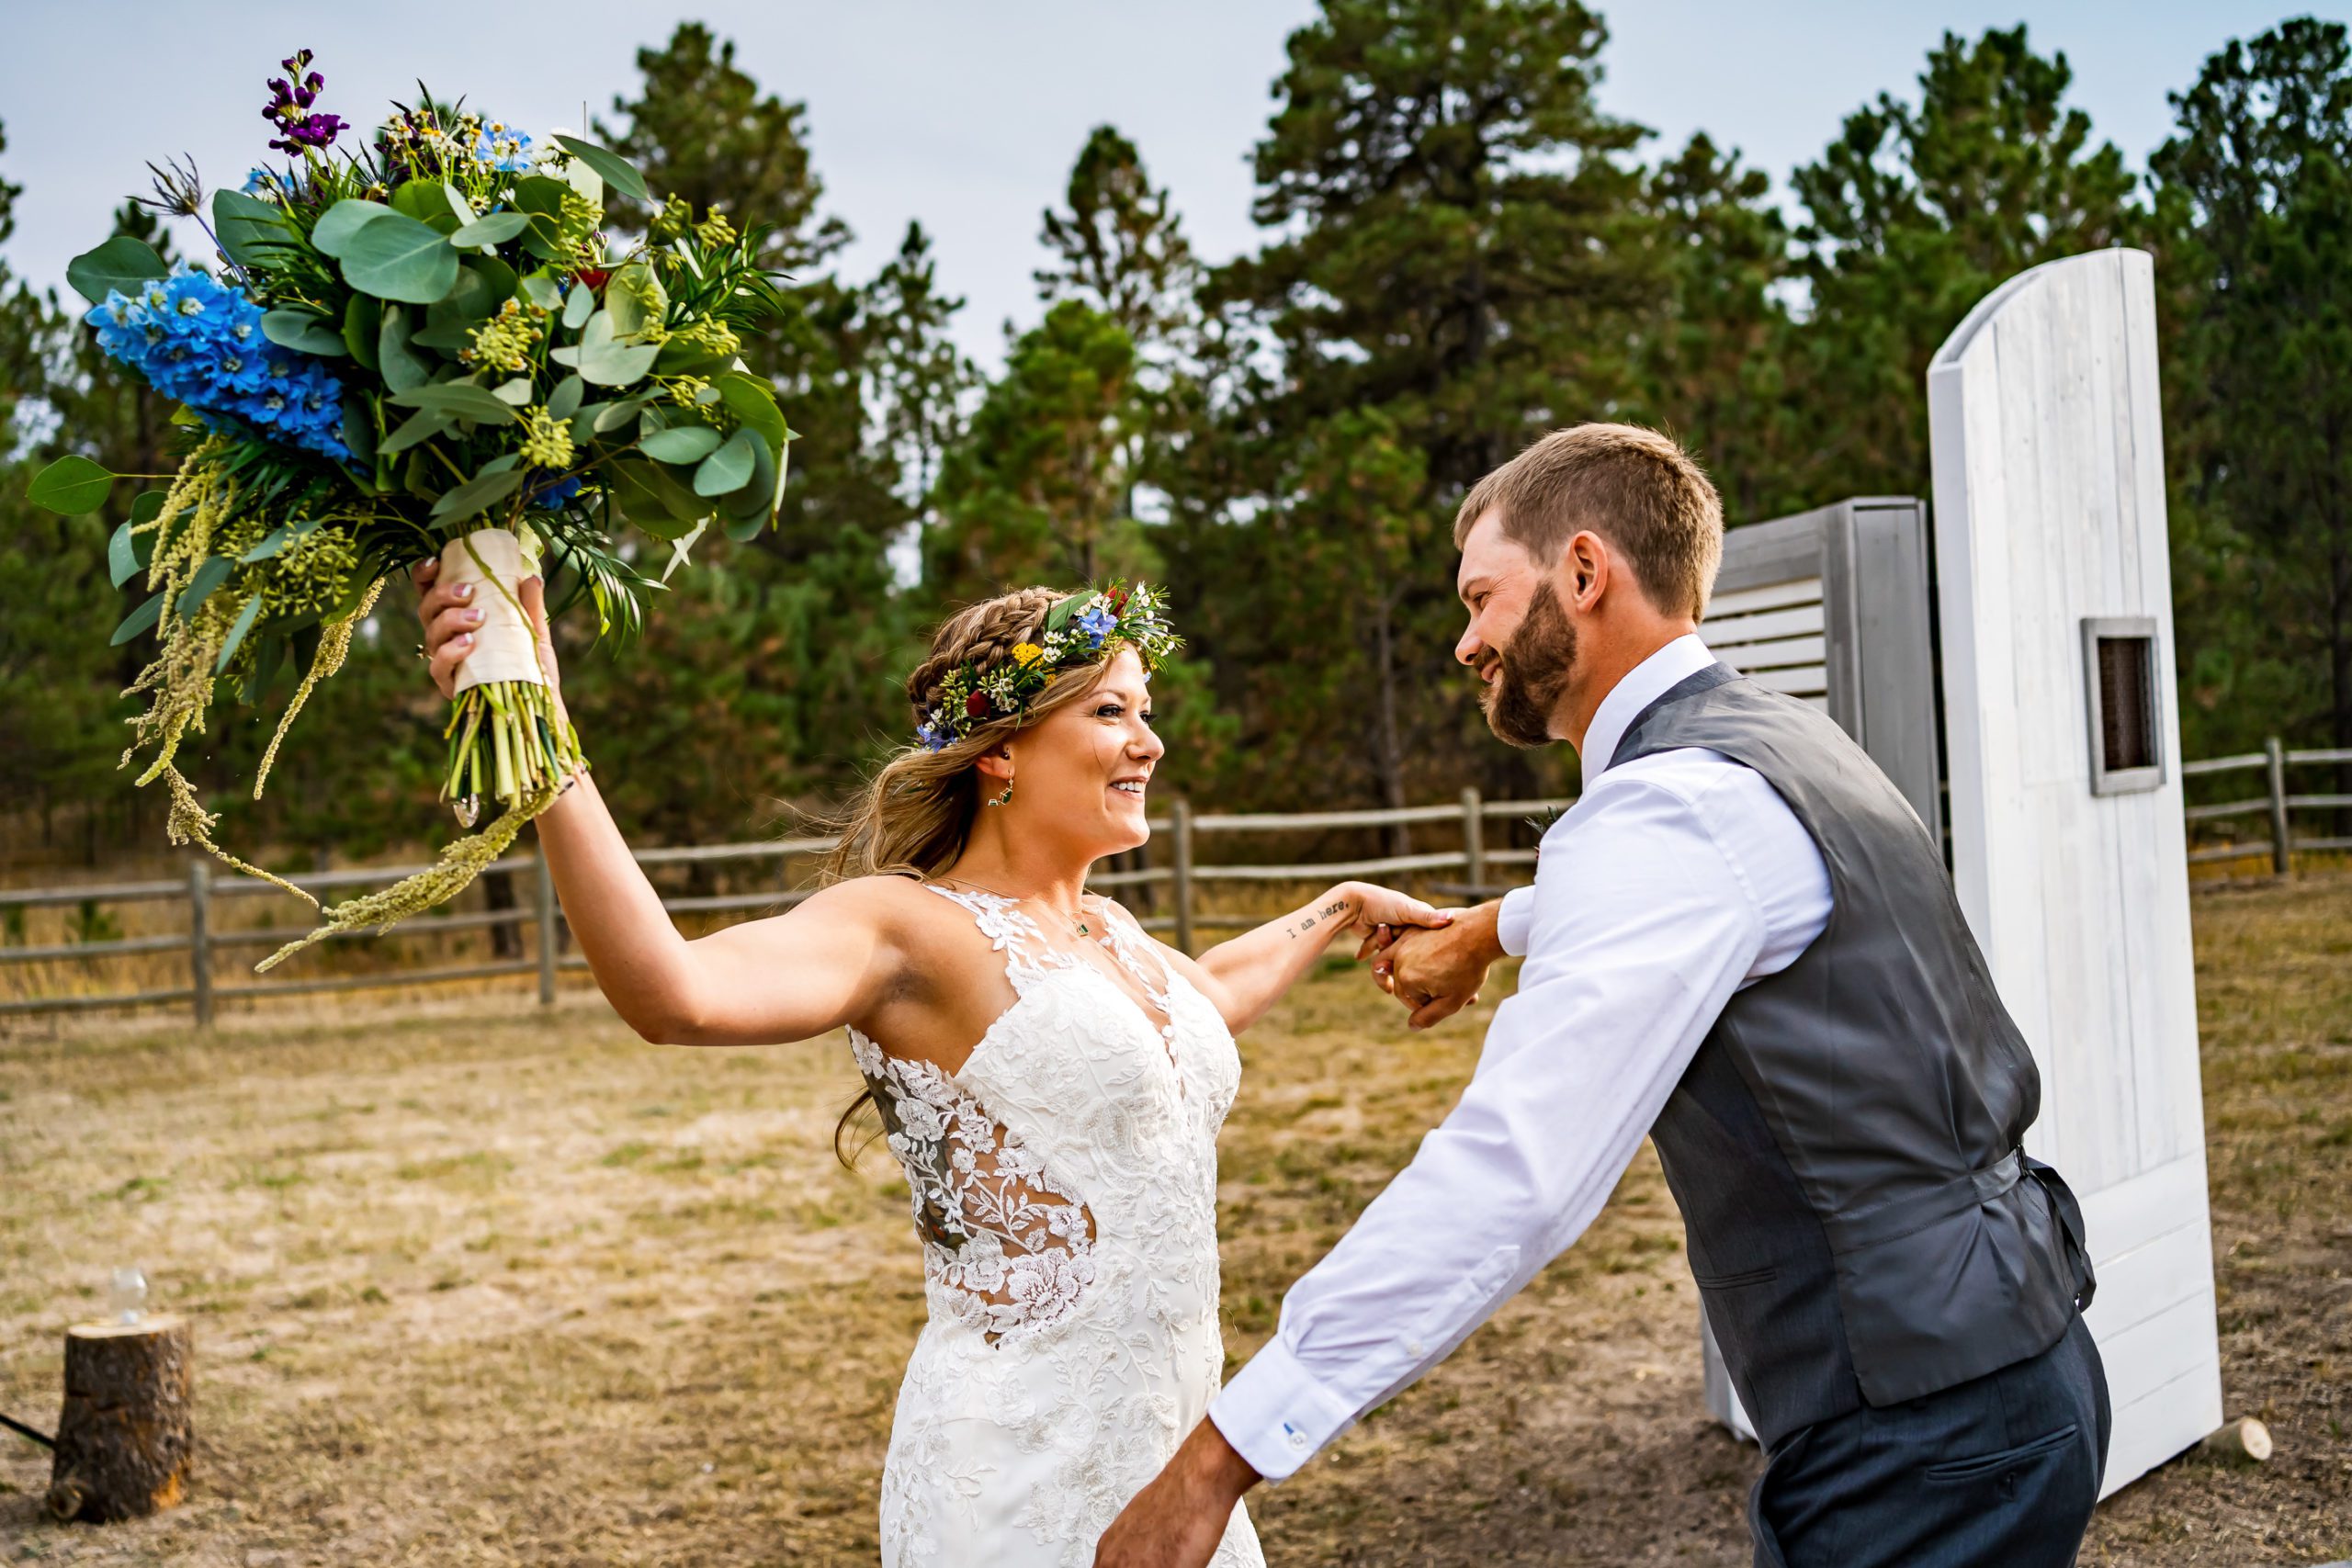 A bride in a white dress and flower crown opens up her arms with her bouquet in her hand to hug her groom after their backyard wedding in Colorado.